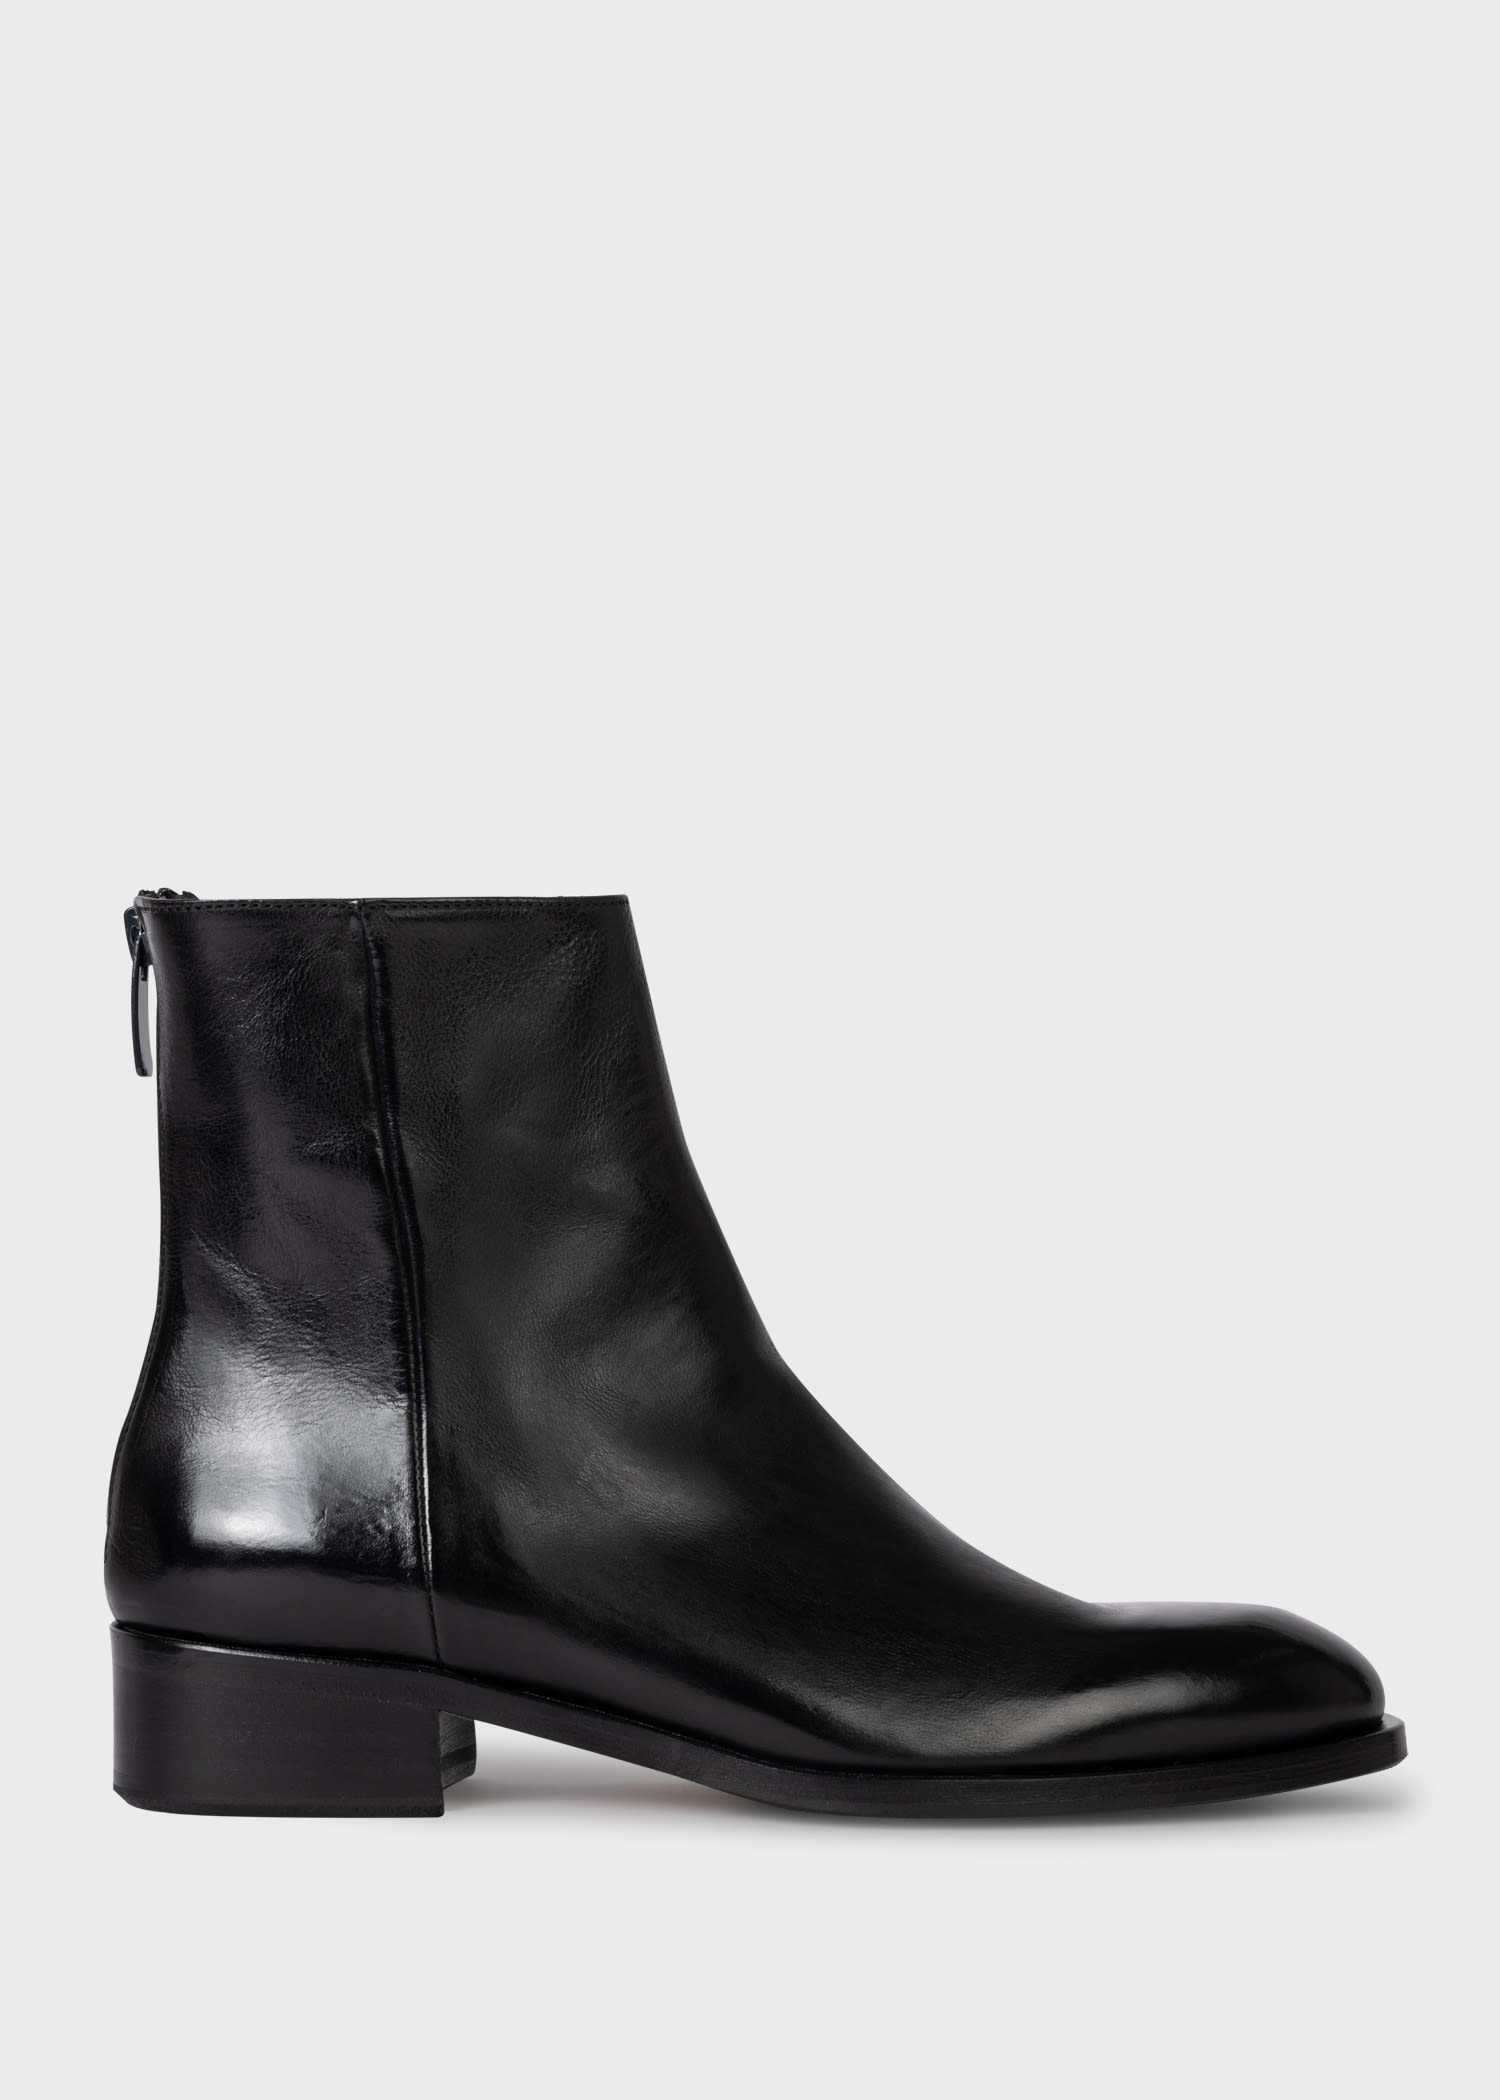 'Geno' Ankle Boots - 1